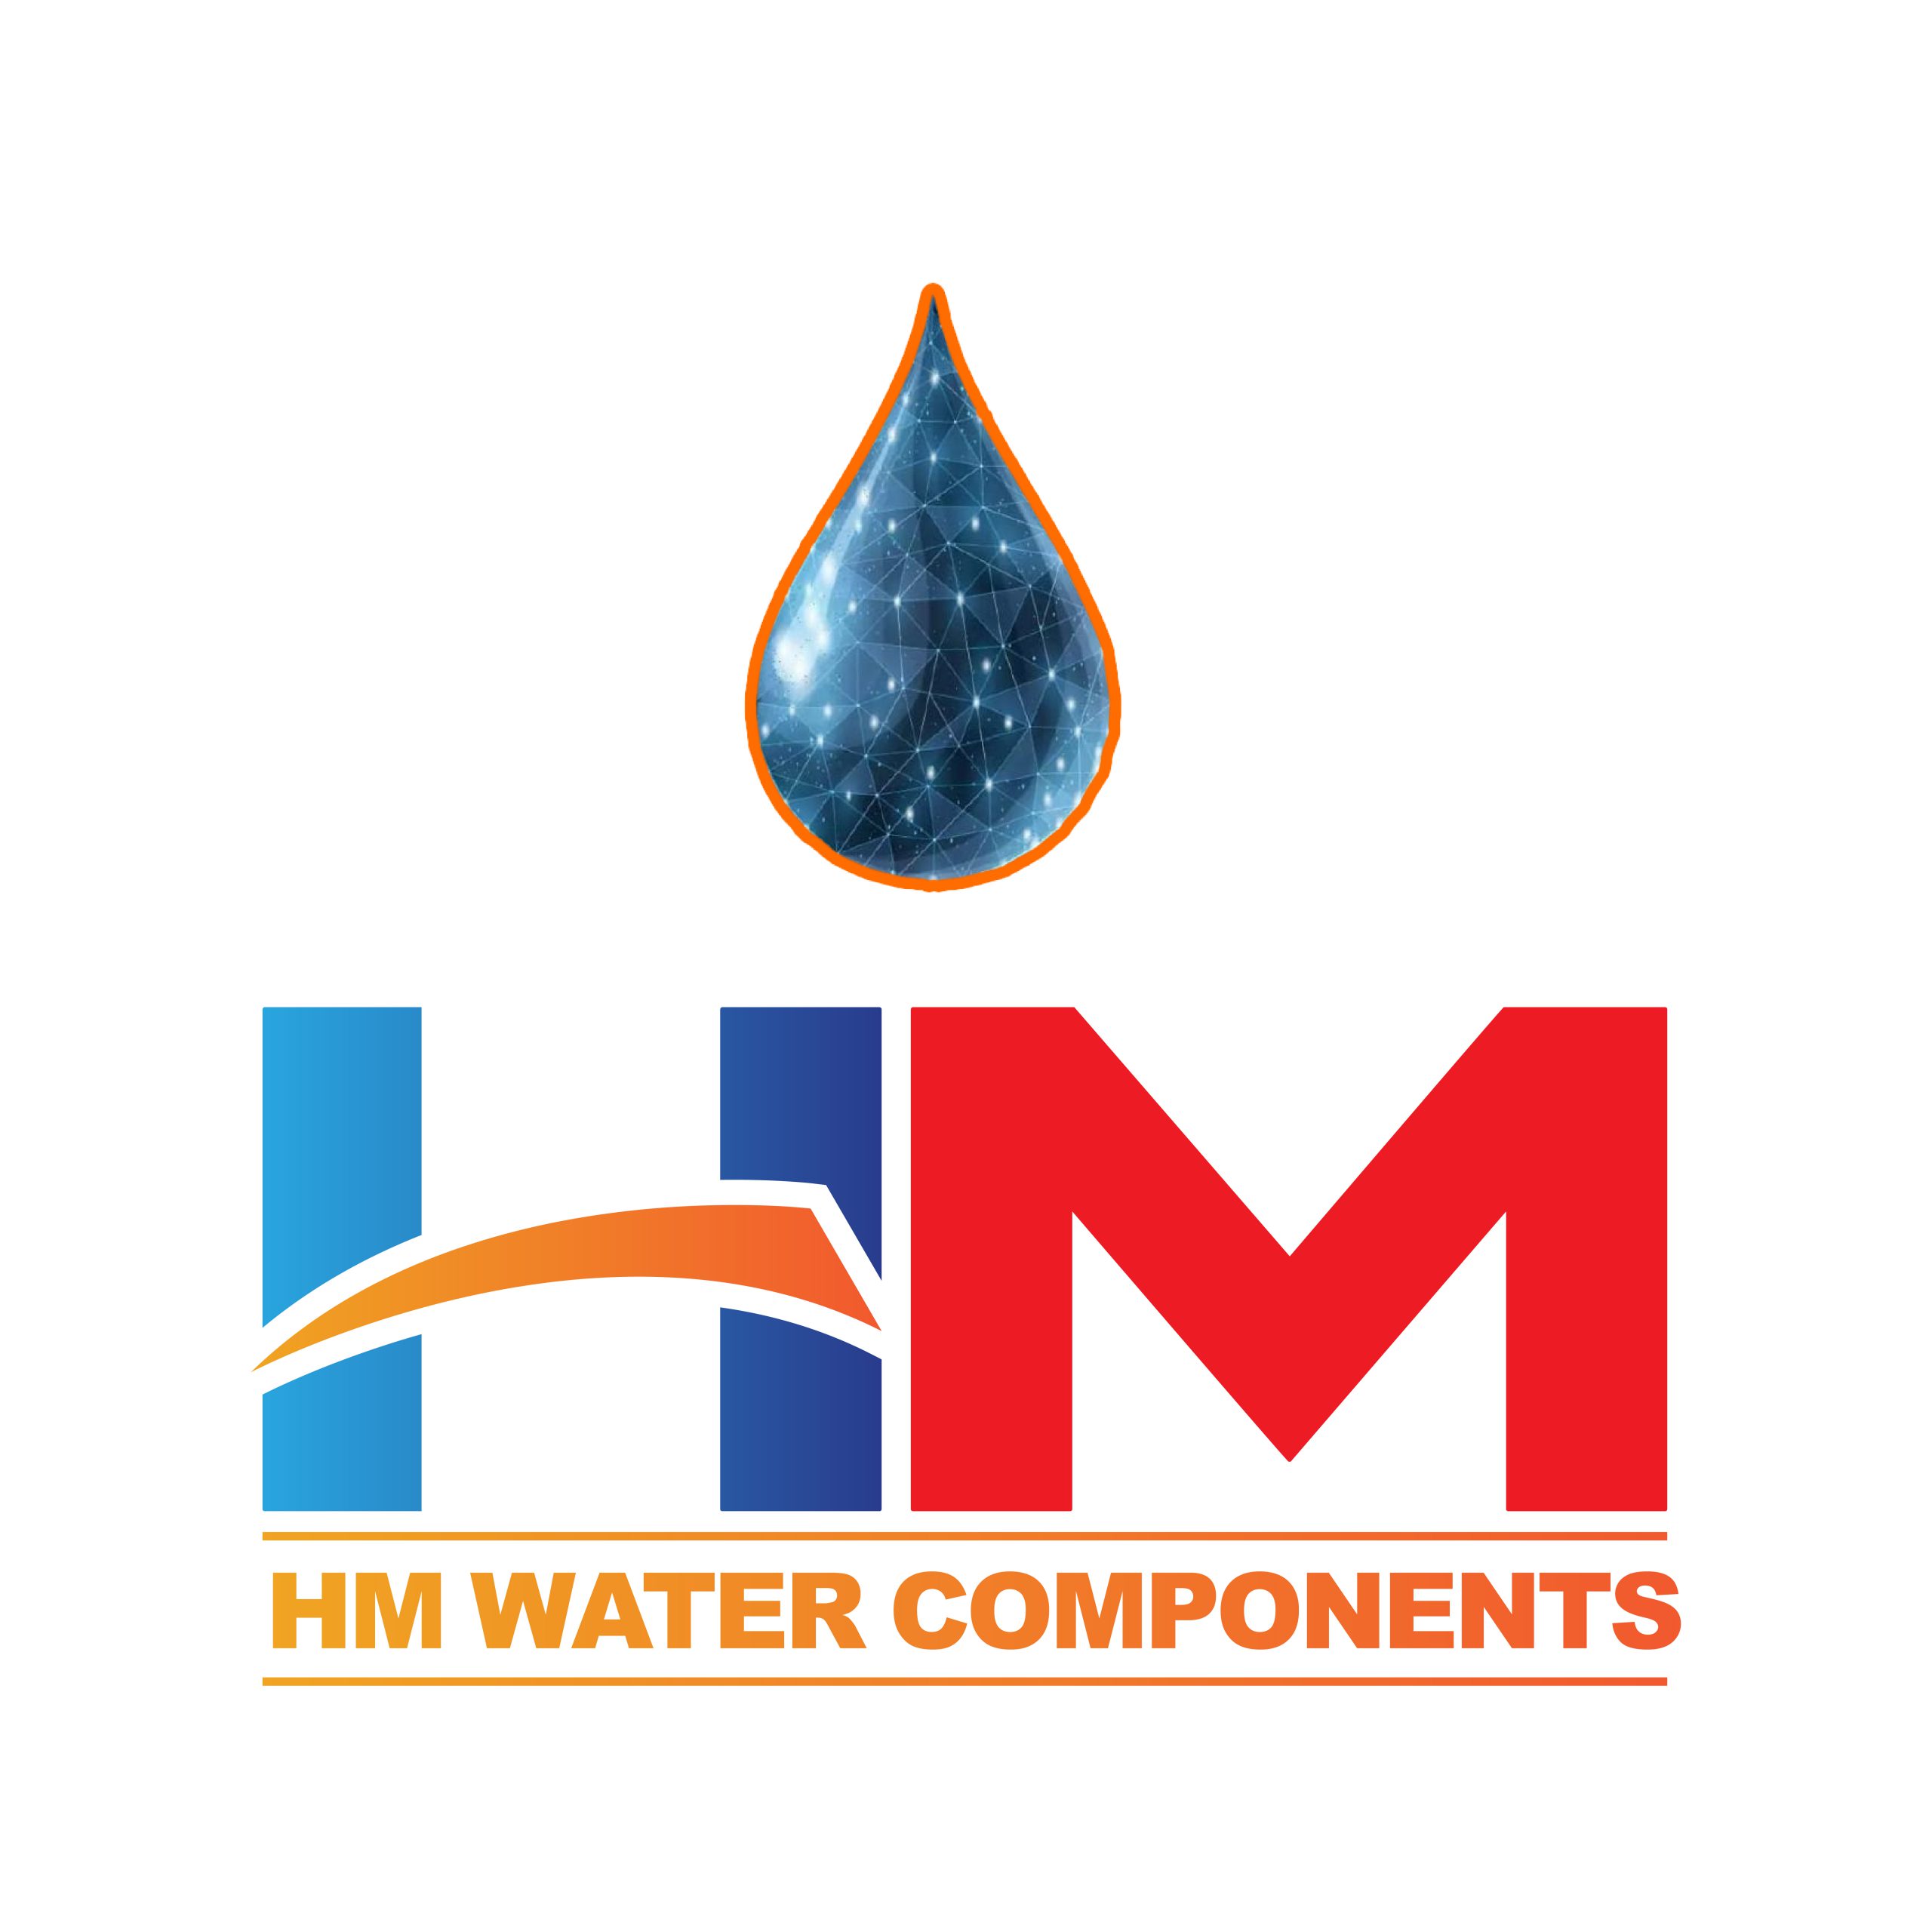 HM Water Components